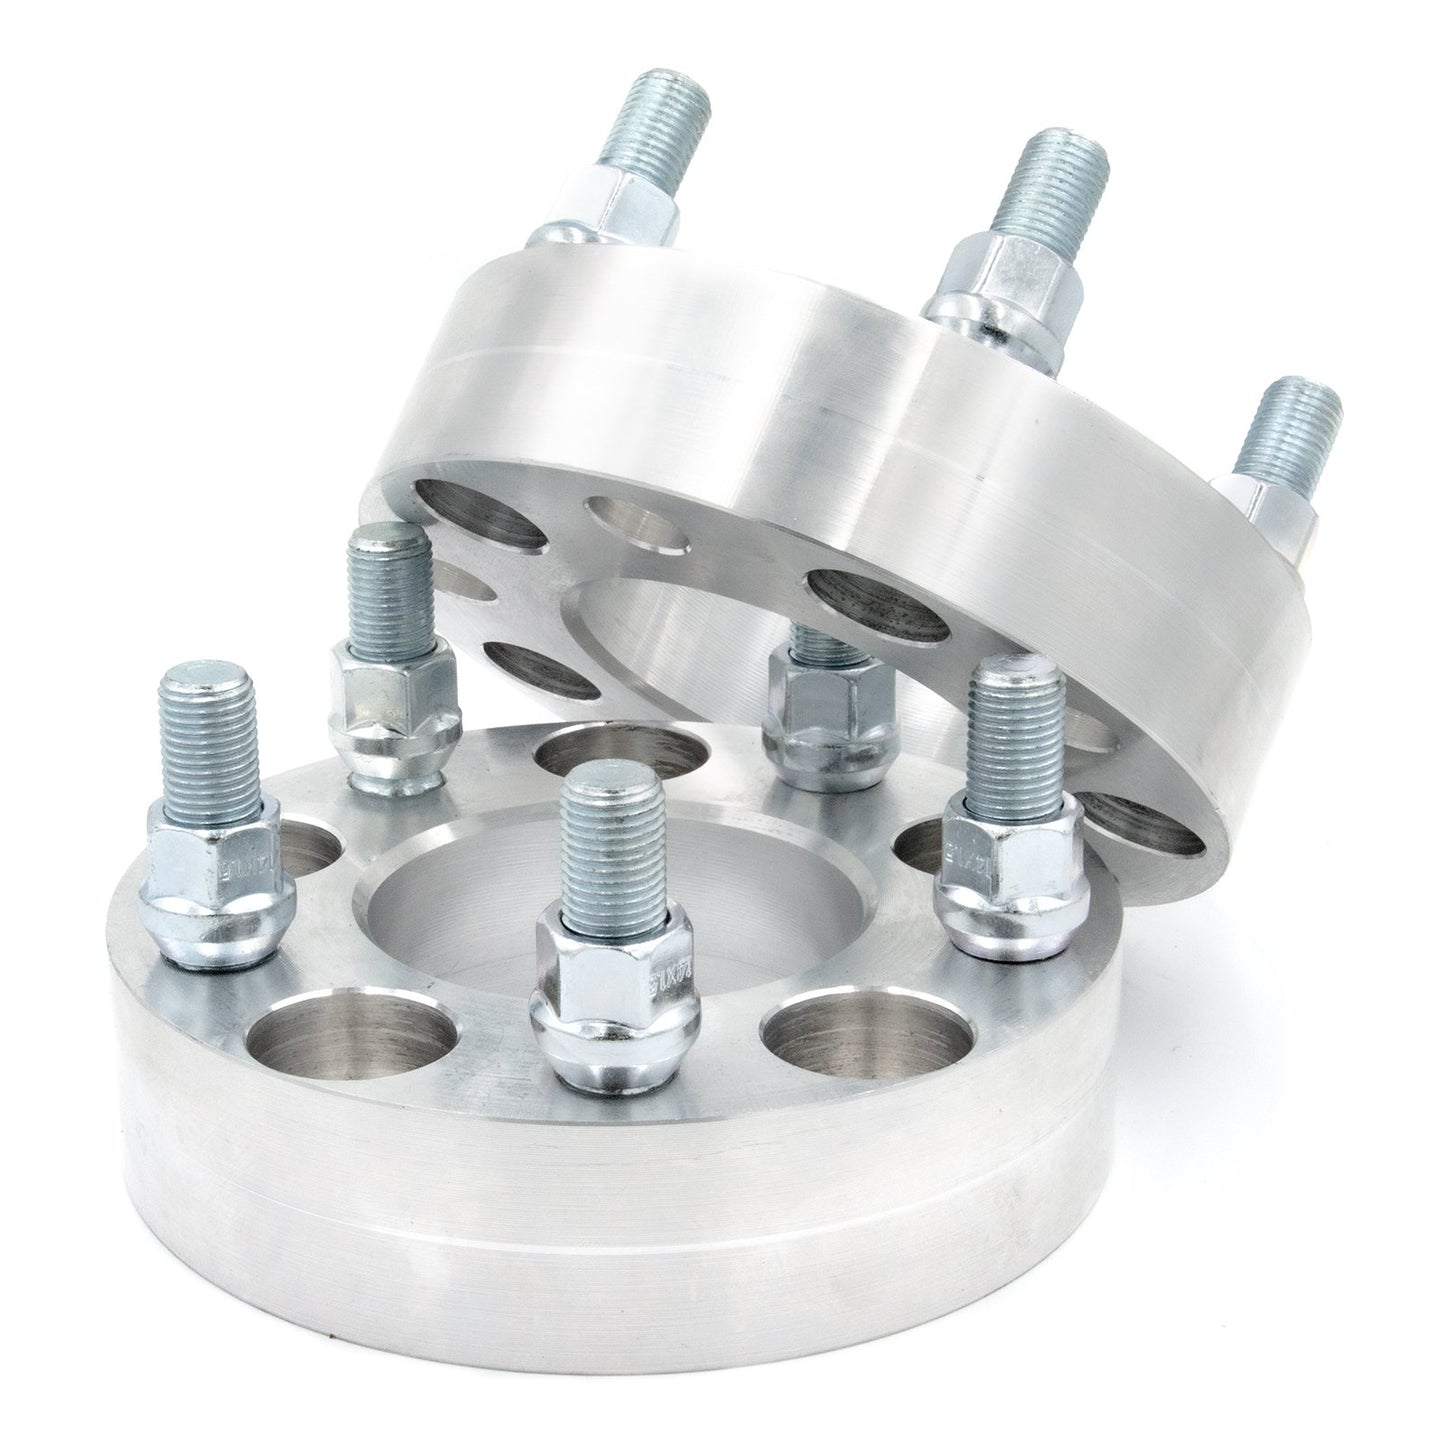 5x5" to 5x110 Wheel Spacer/Adapter - Thickness: 3/4"- 4"